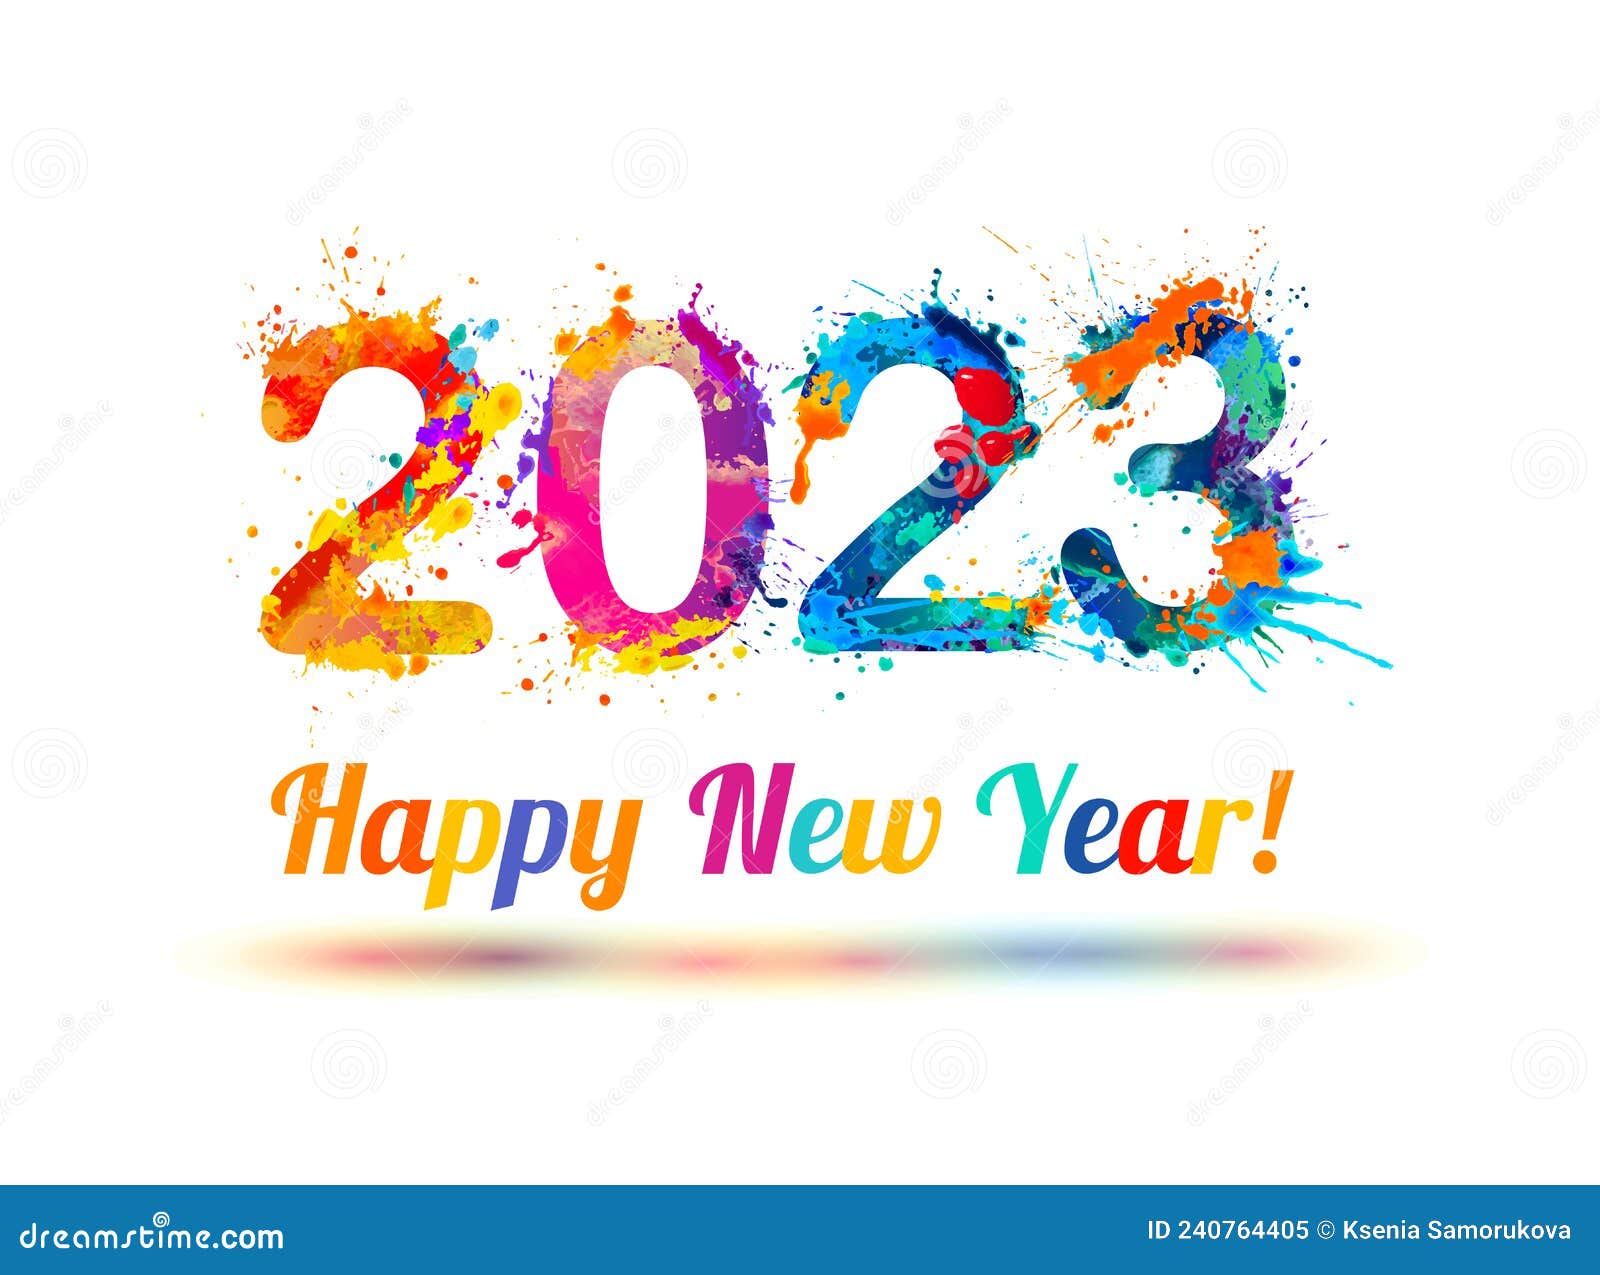 Congratulation Card Happy New Year 2023 Stock Vector Illustration Of Holiday Paint 240764405